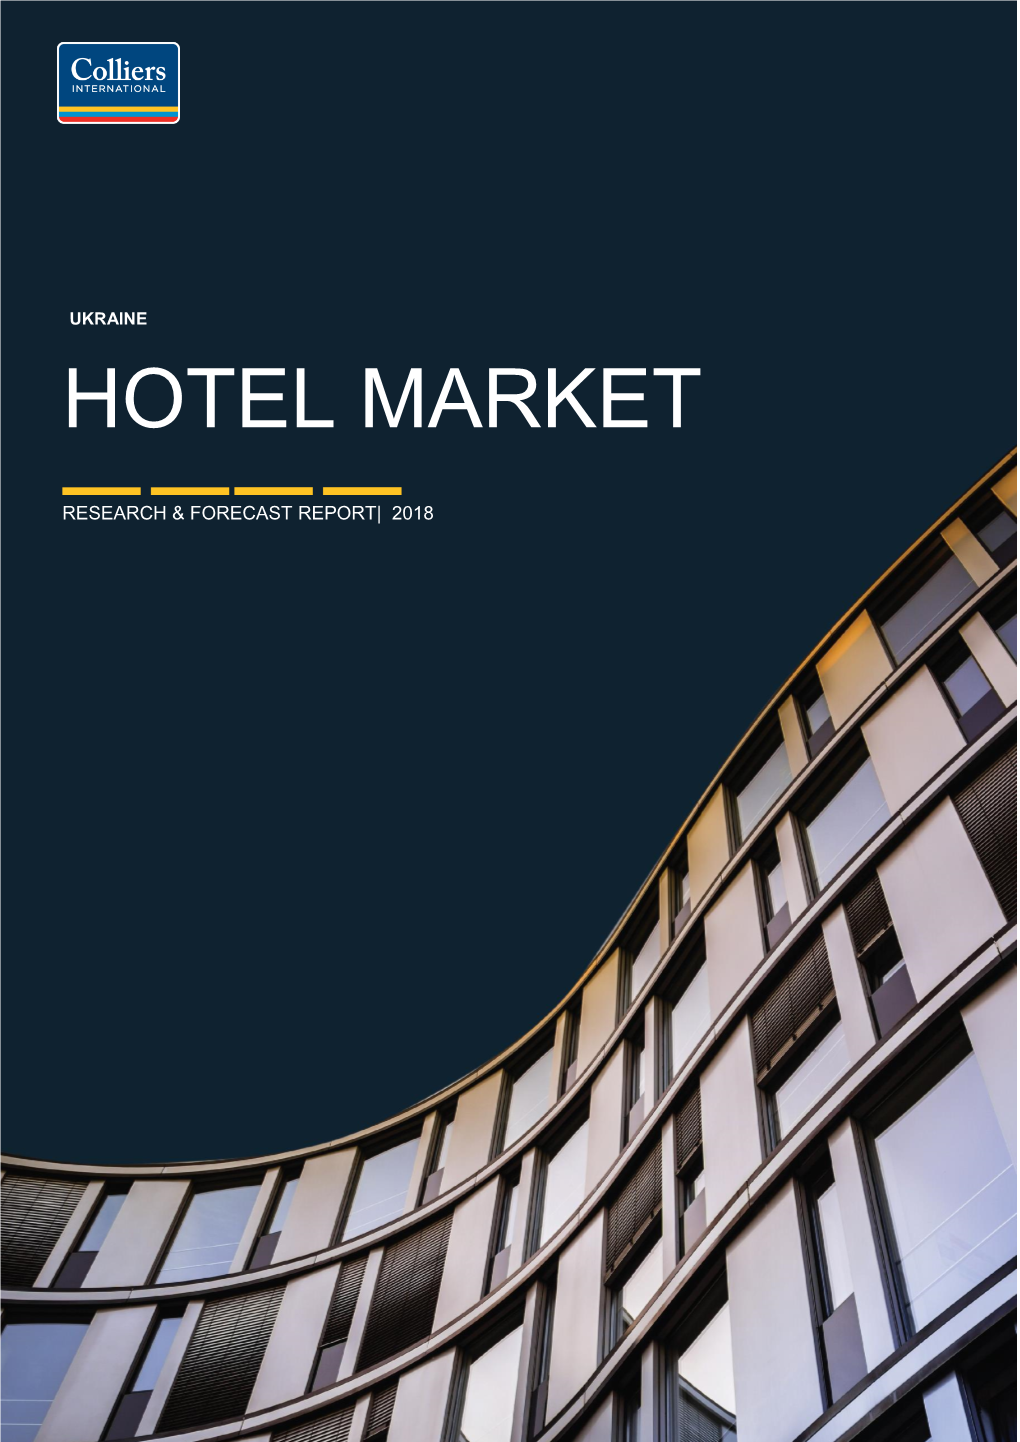 Hotel Market Overview | Colliers International